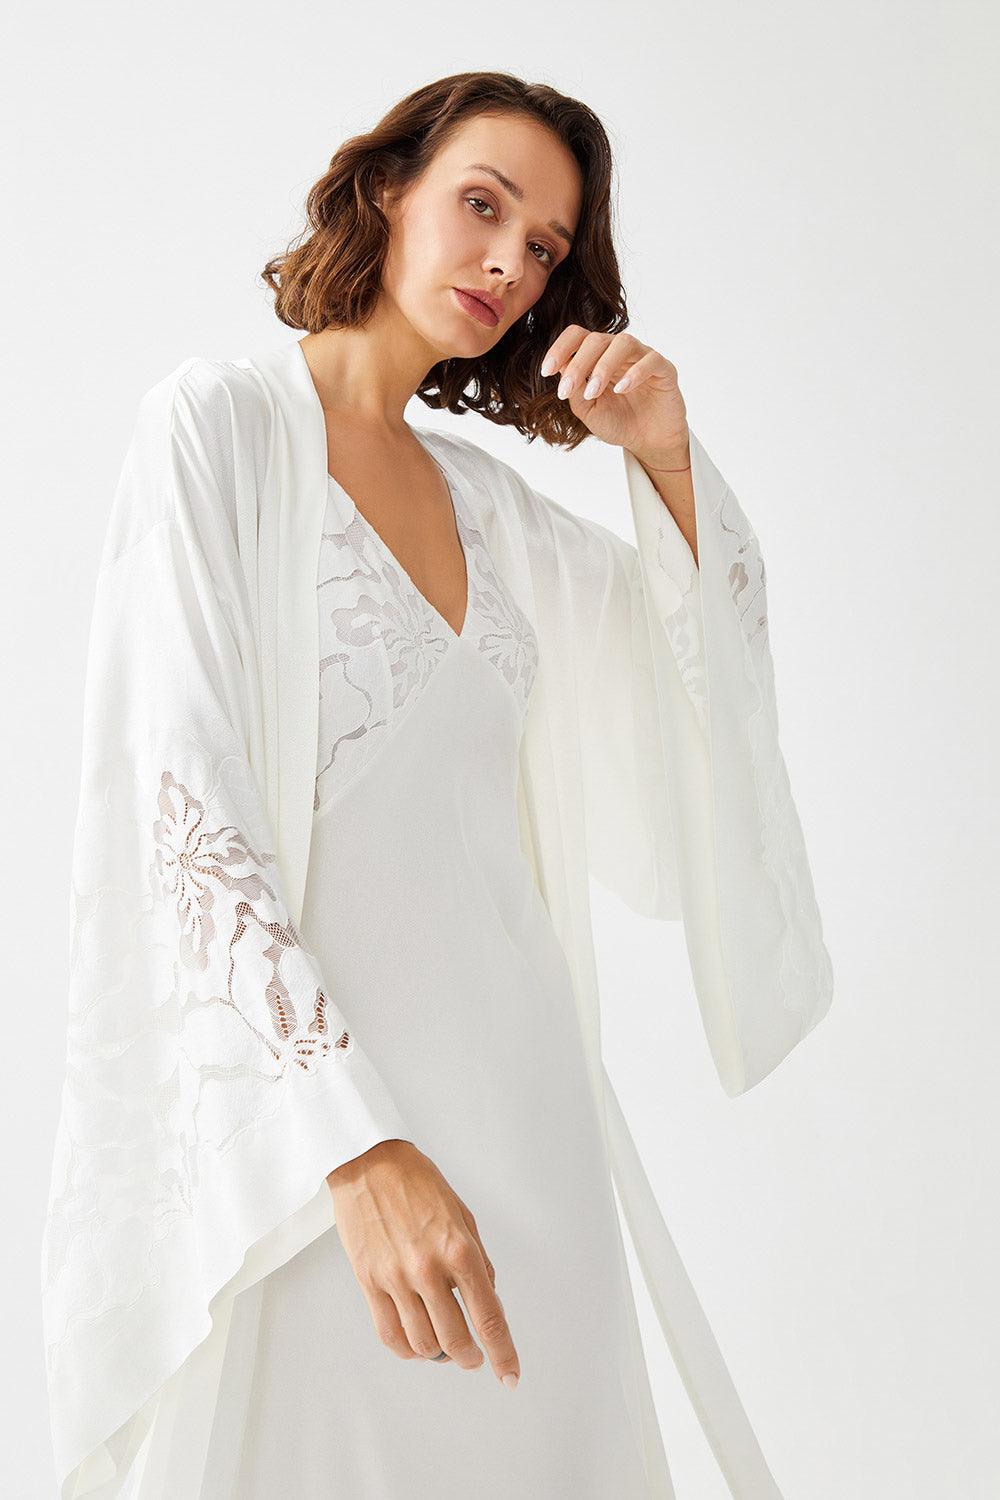 Argos Long Rayon Trimmed with Lace Robe Set - Off White - Bocan